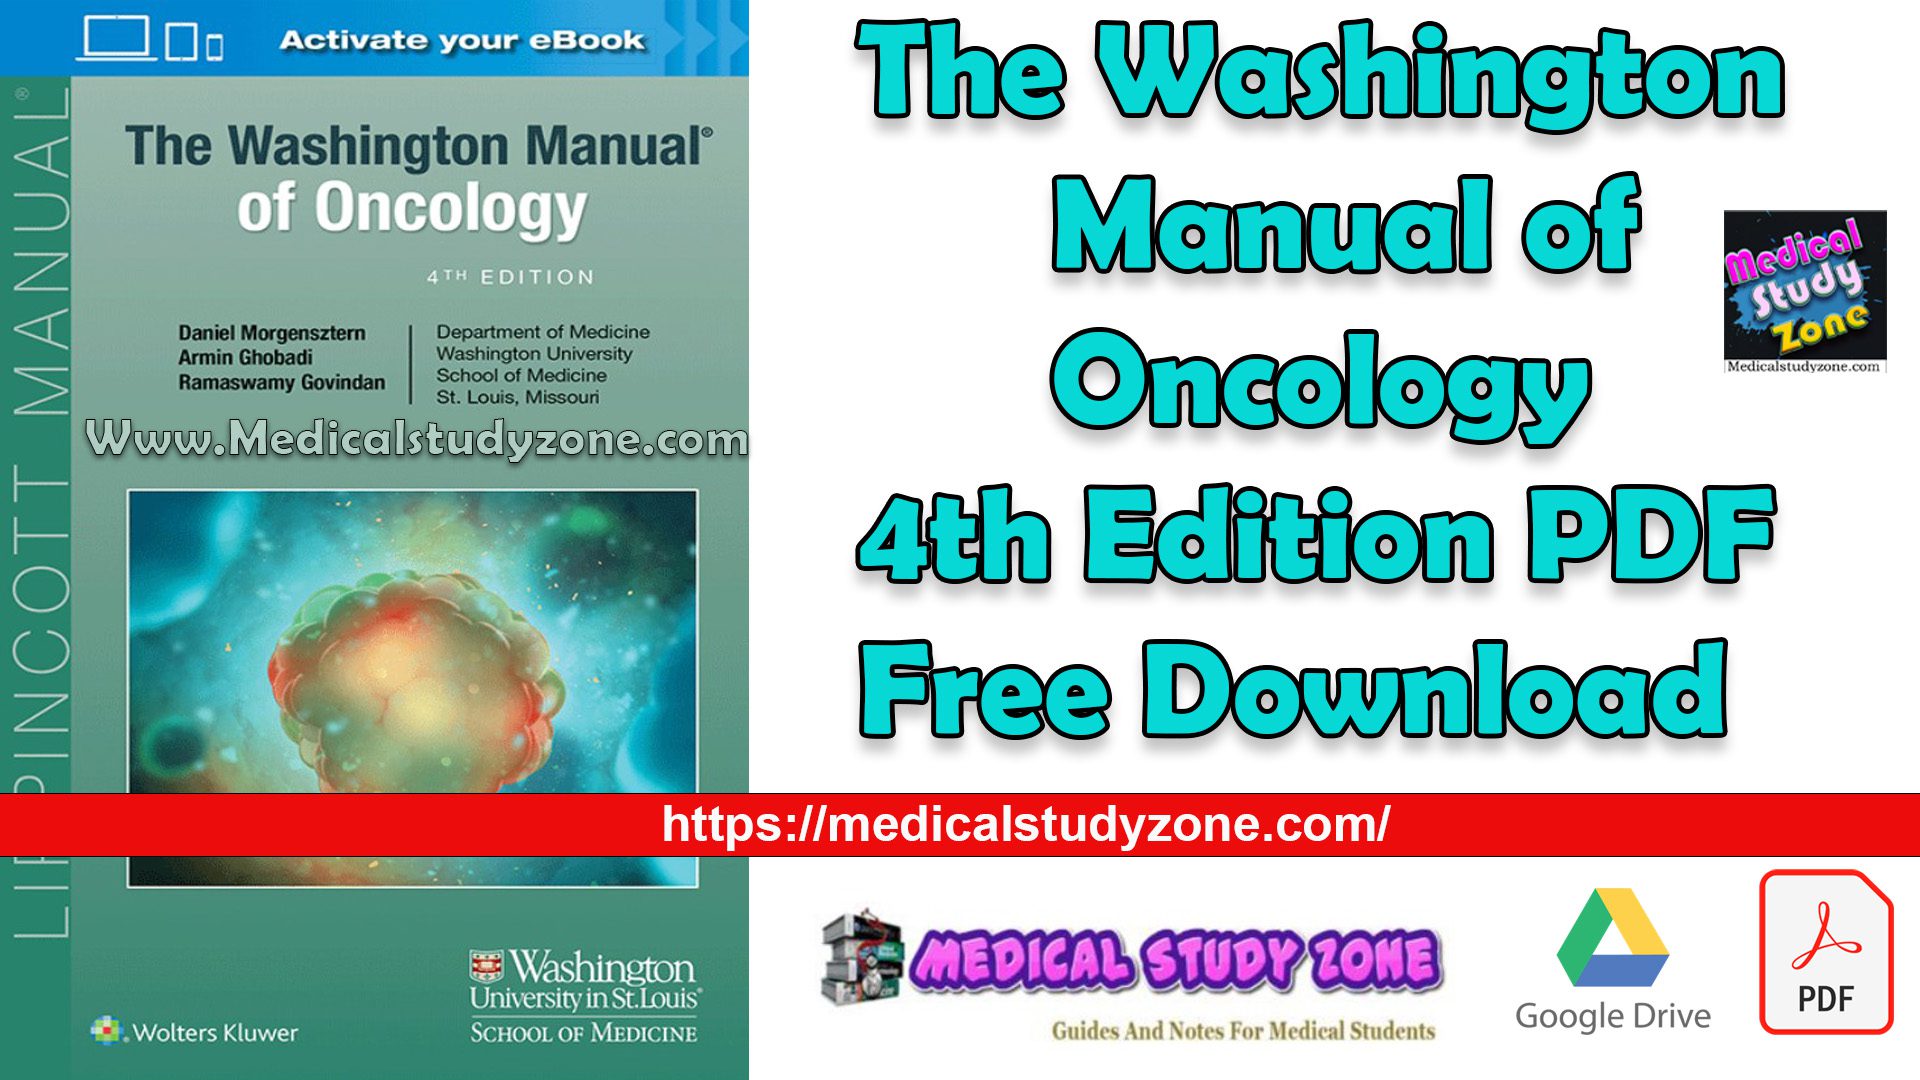 The Washington Manual of Oncology 4th Edition PDF Free Download